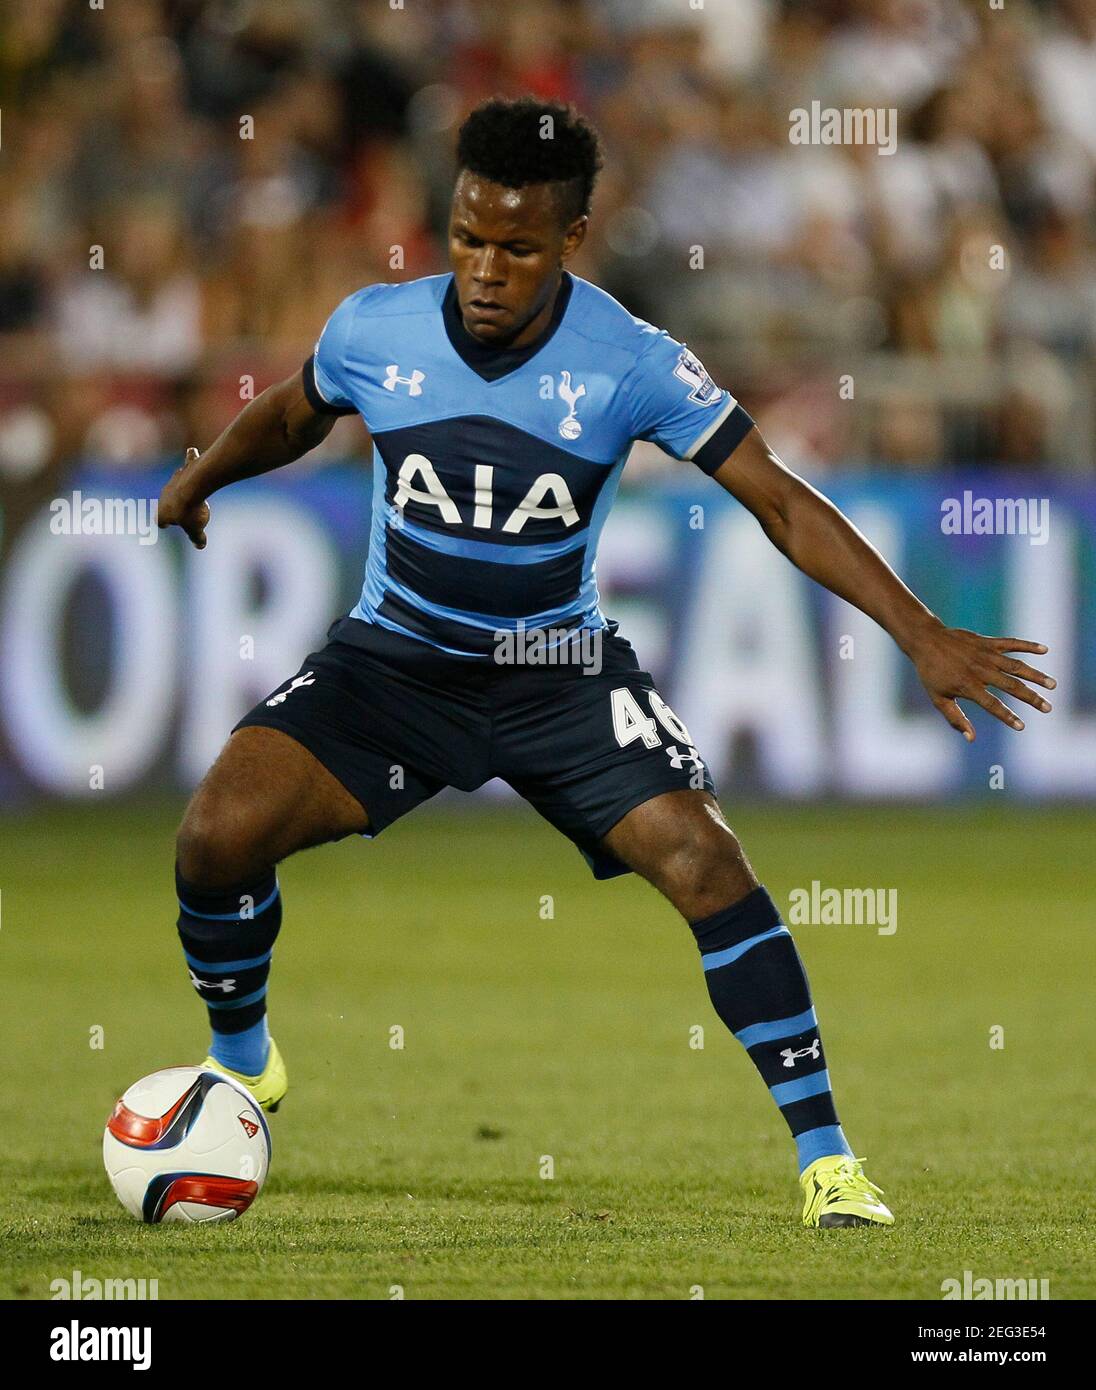 Football - MLS All-Stars v Tottenham Hotspur - AT&T MLS All Stars Game - Pre Season Friendly - Dick's Sporting Goods Park, Colorado, United States of America - 15/16 - 29/7/15  Tottenham Hotspur's Shaquile Coulthirst  Action Images via Reuters / Rick Wilking Stock Photo